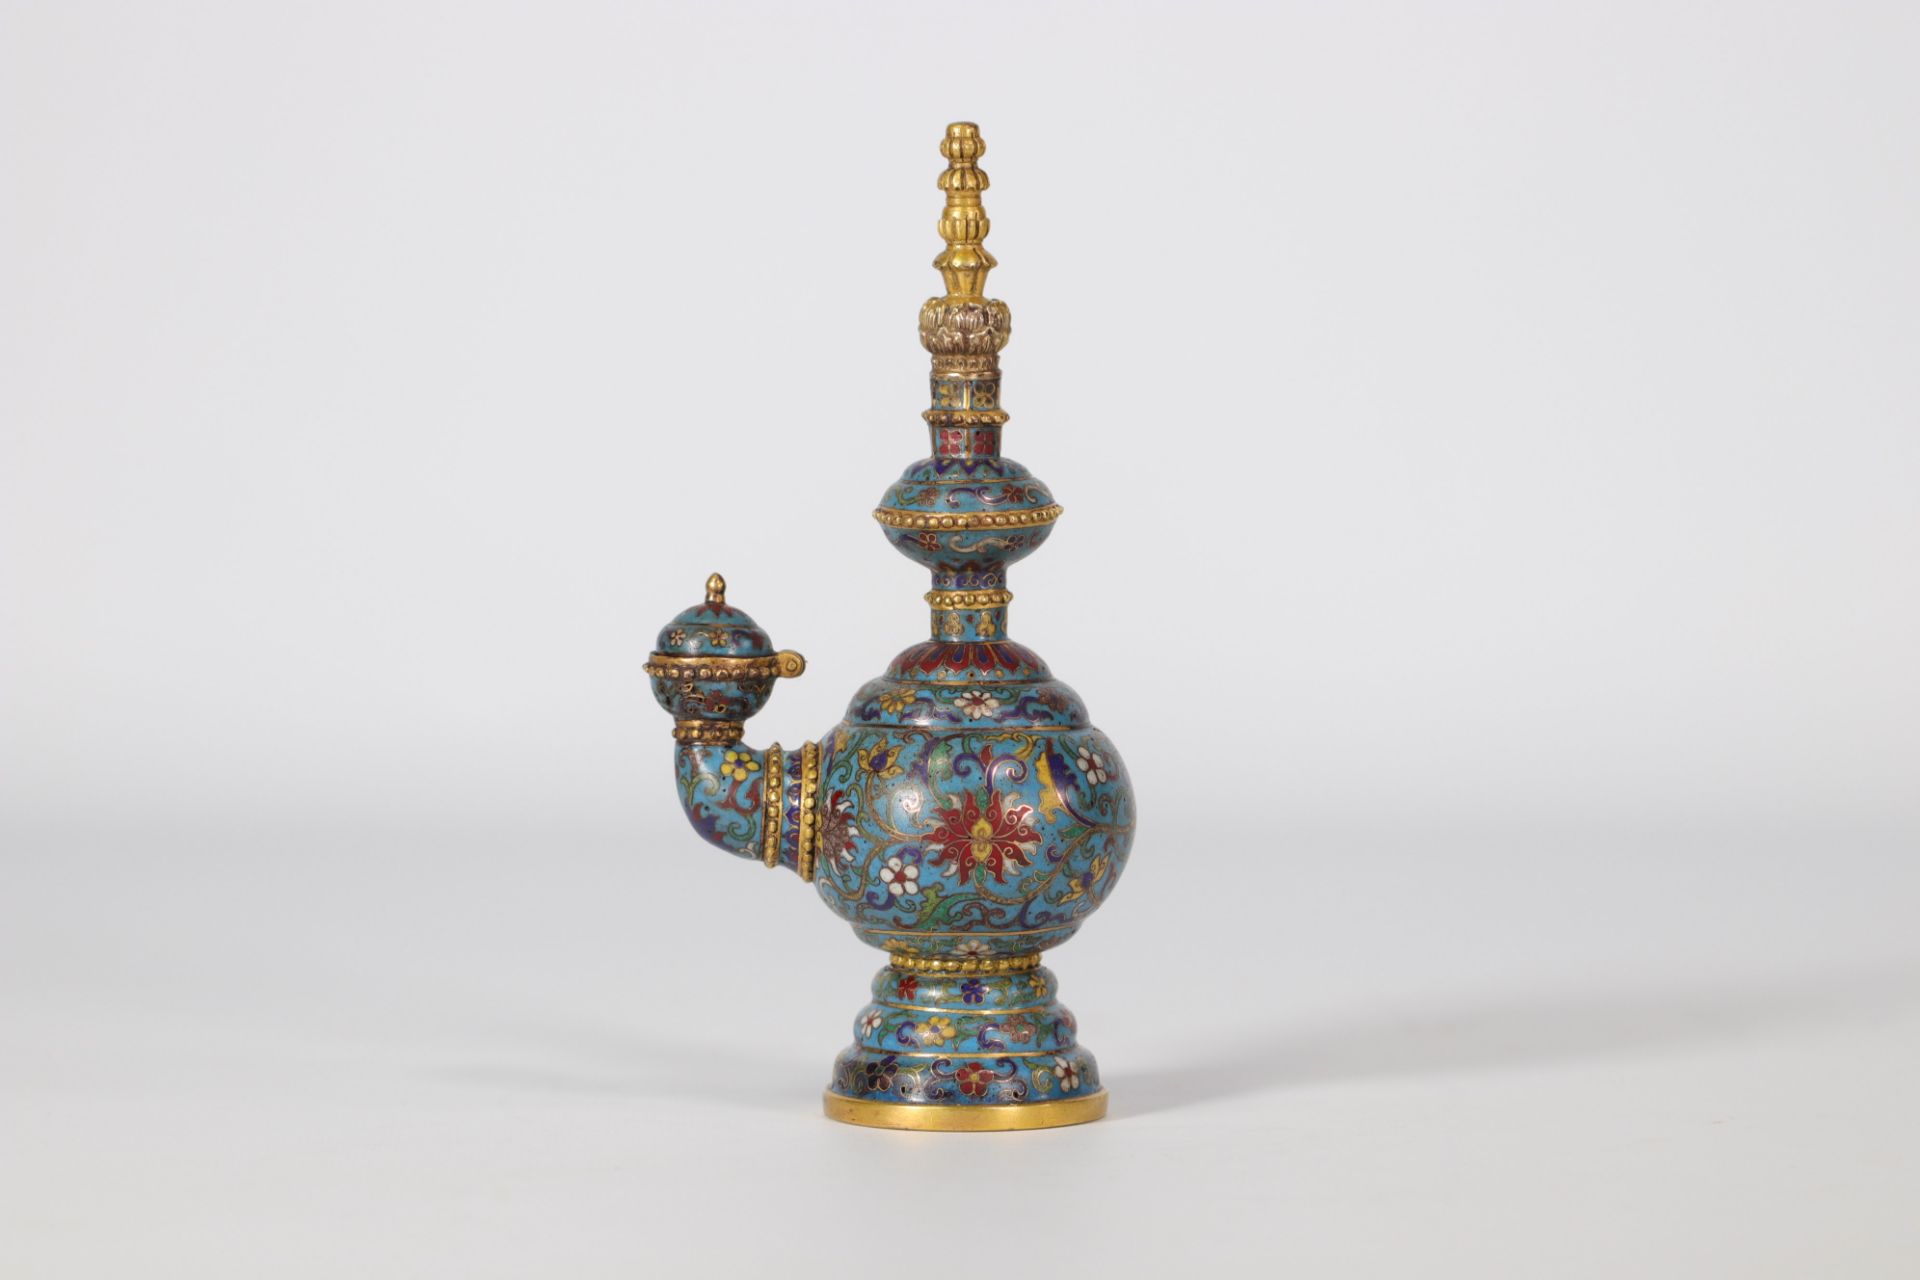 Cloisonne vase with lotus design on a blue background with Qianlong mark from 18th century